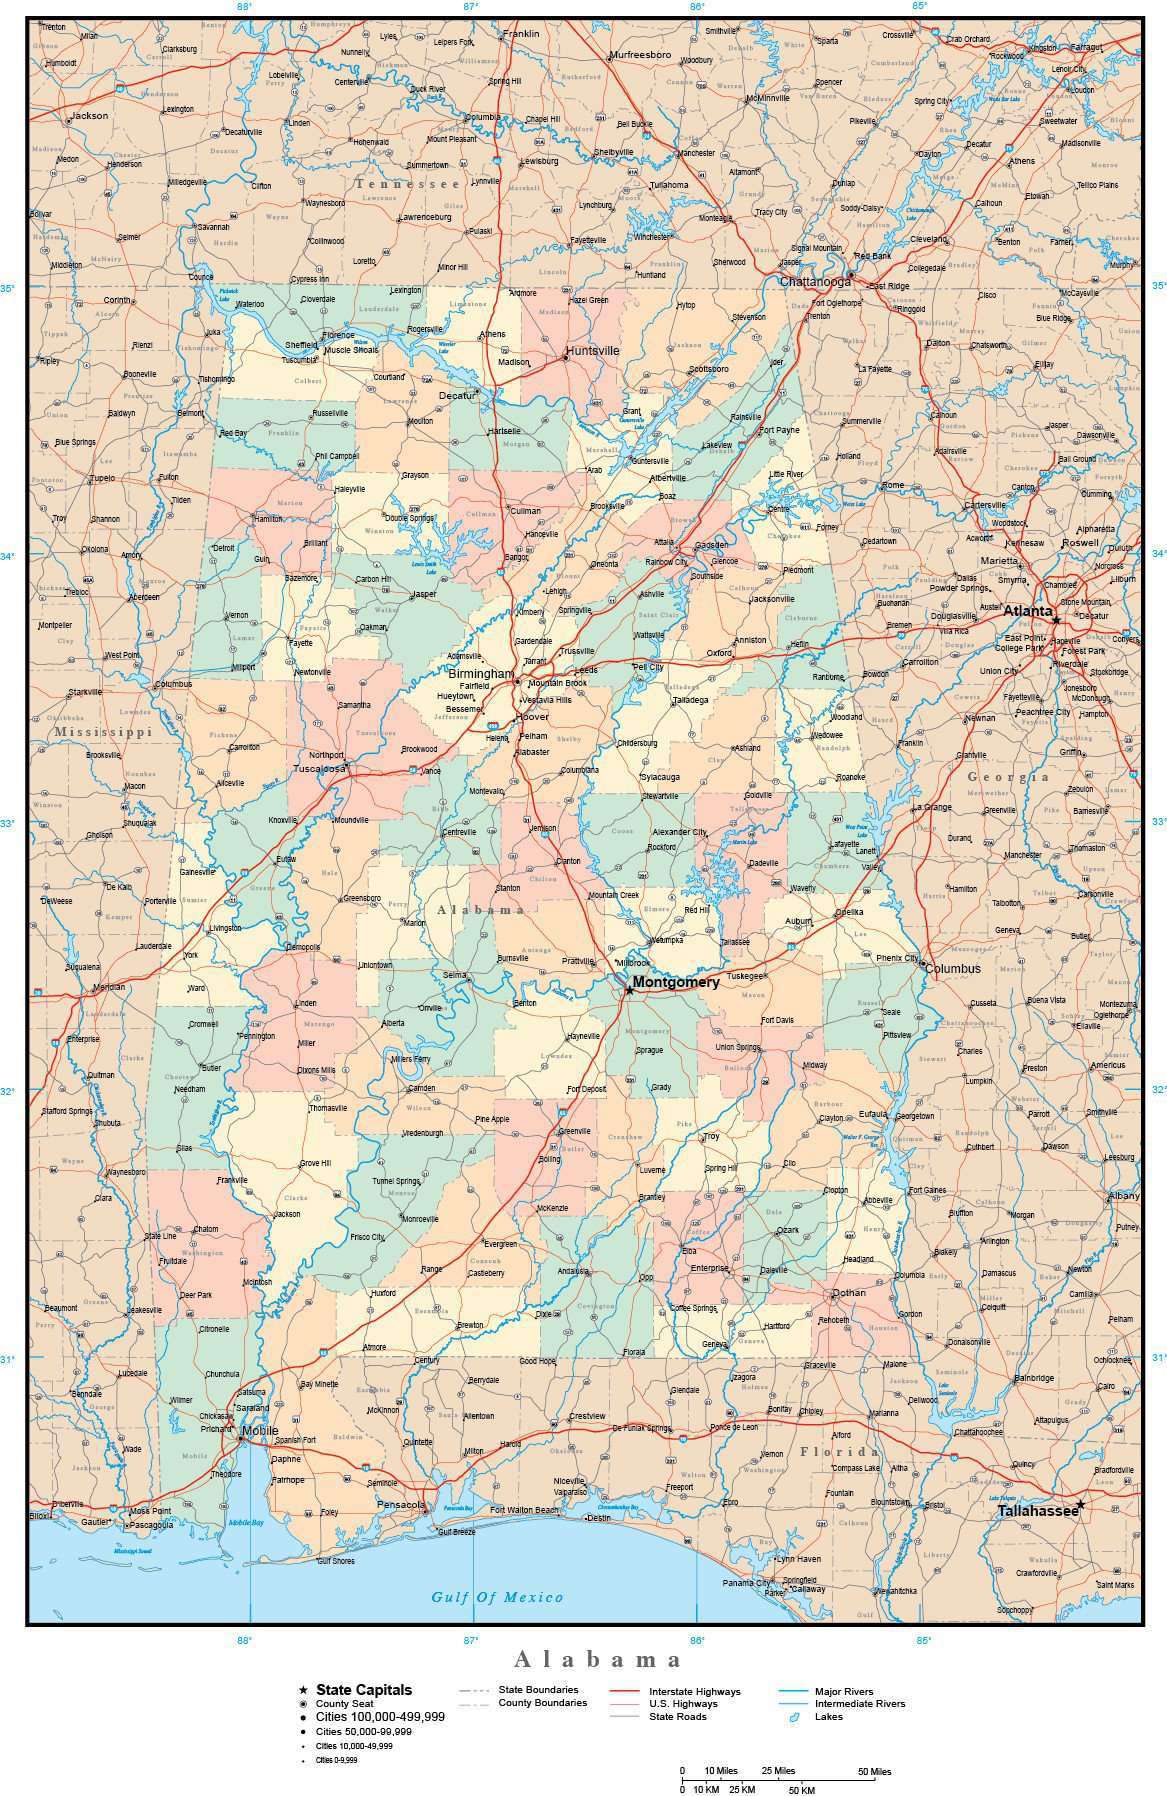 Alabama State Adobe Illustrator Map with Counties, Cities, County Seats